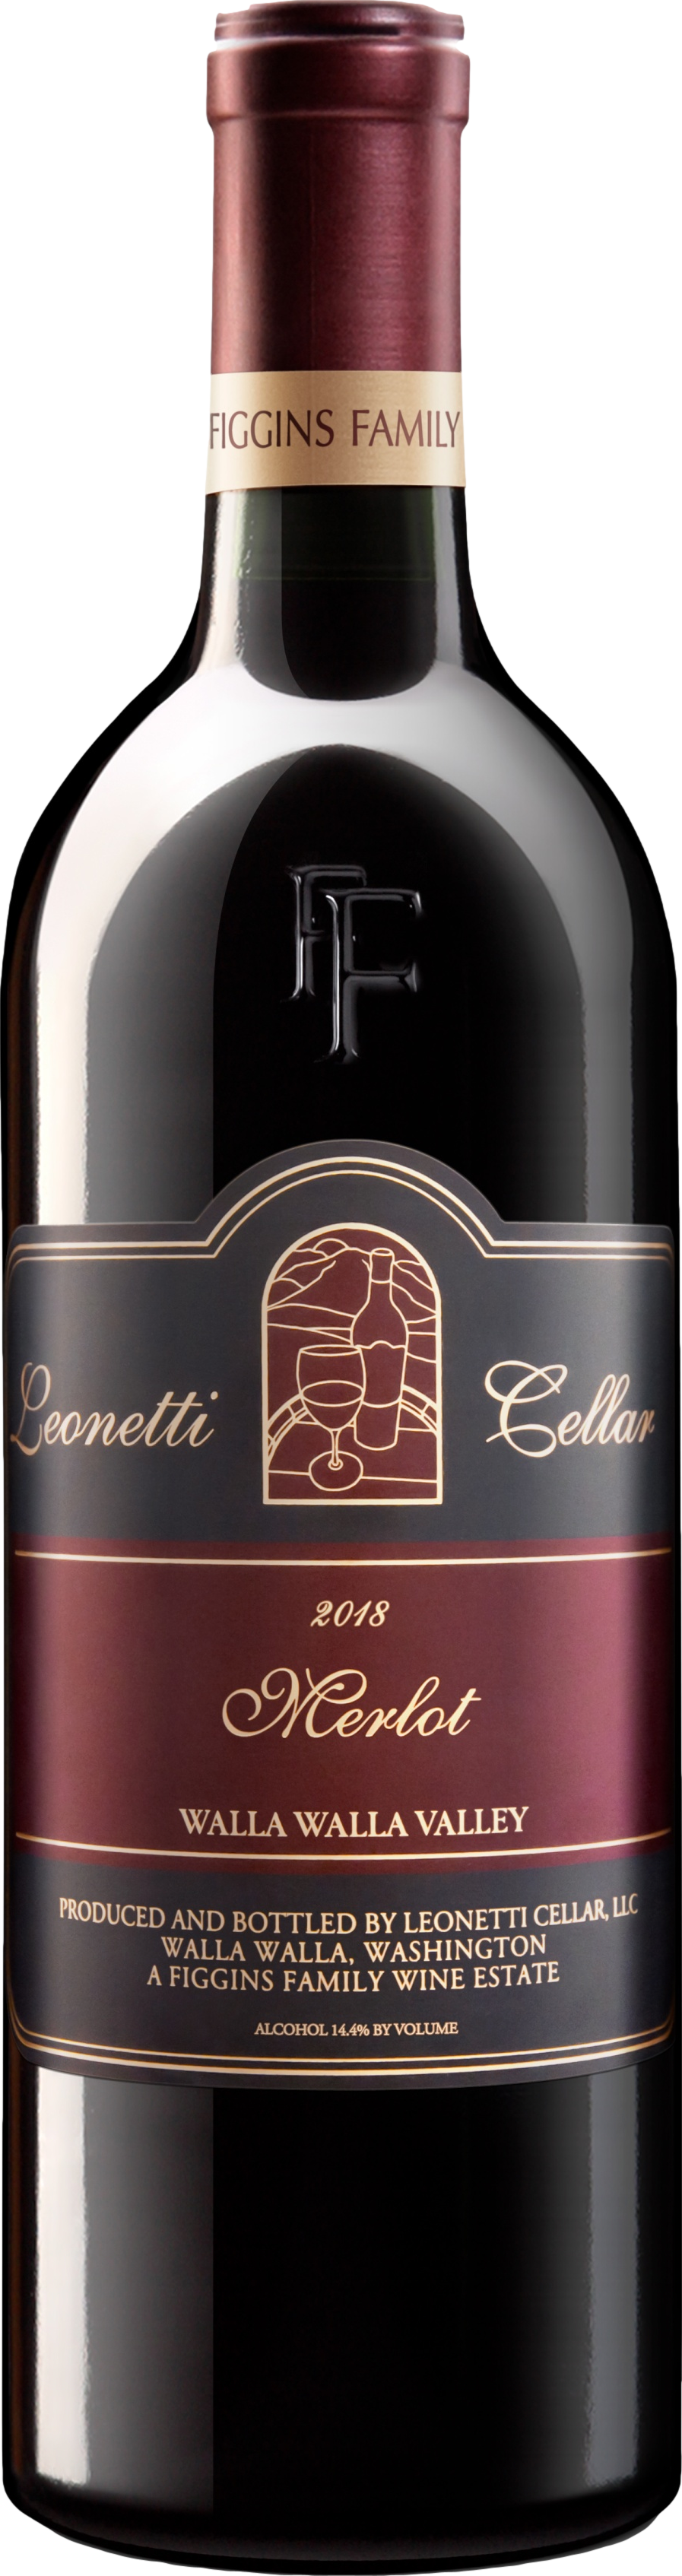 Product image of Leonetti Merlot 2018 from 8wines